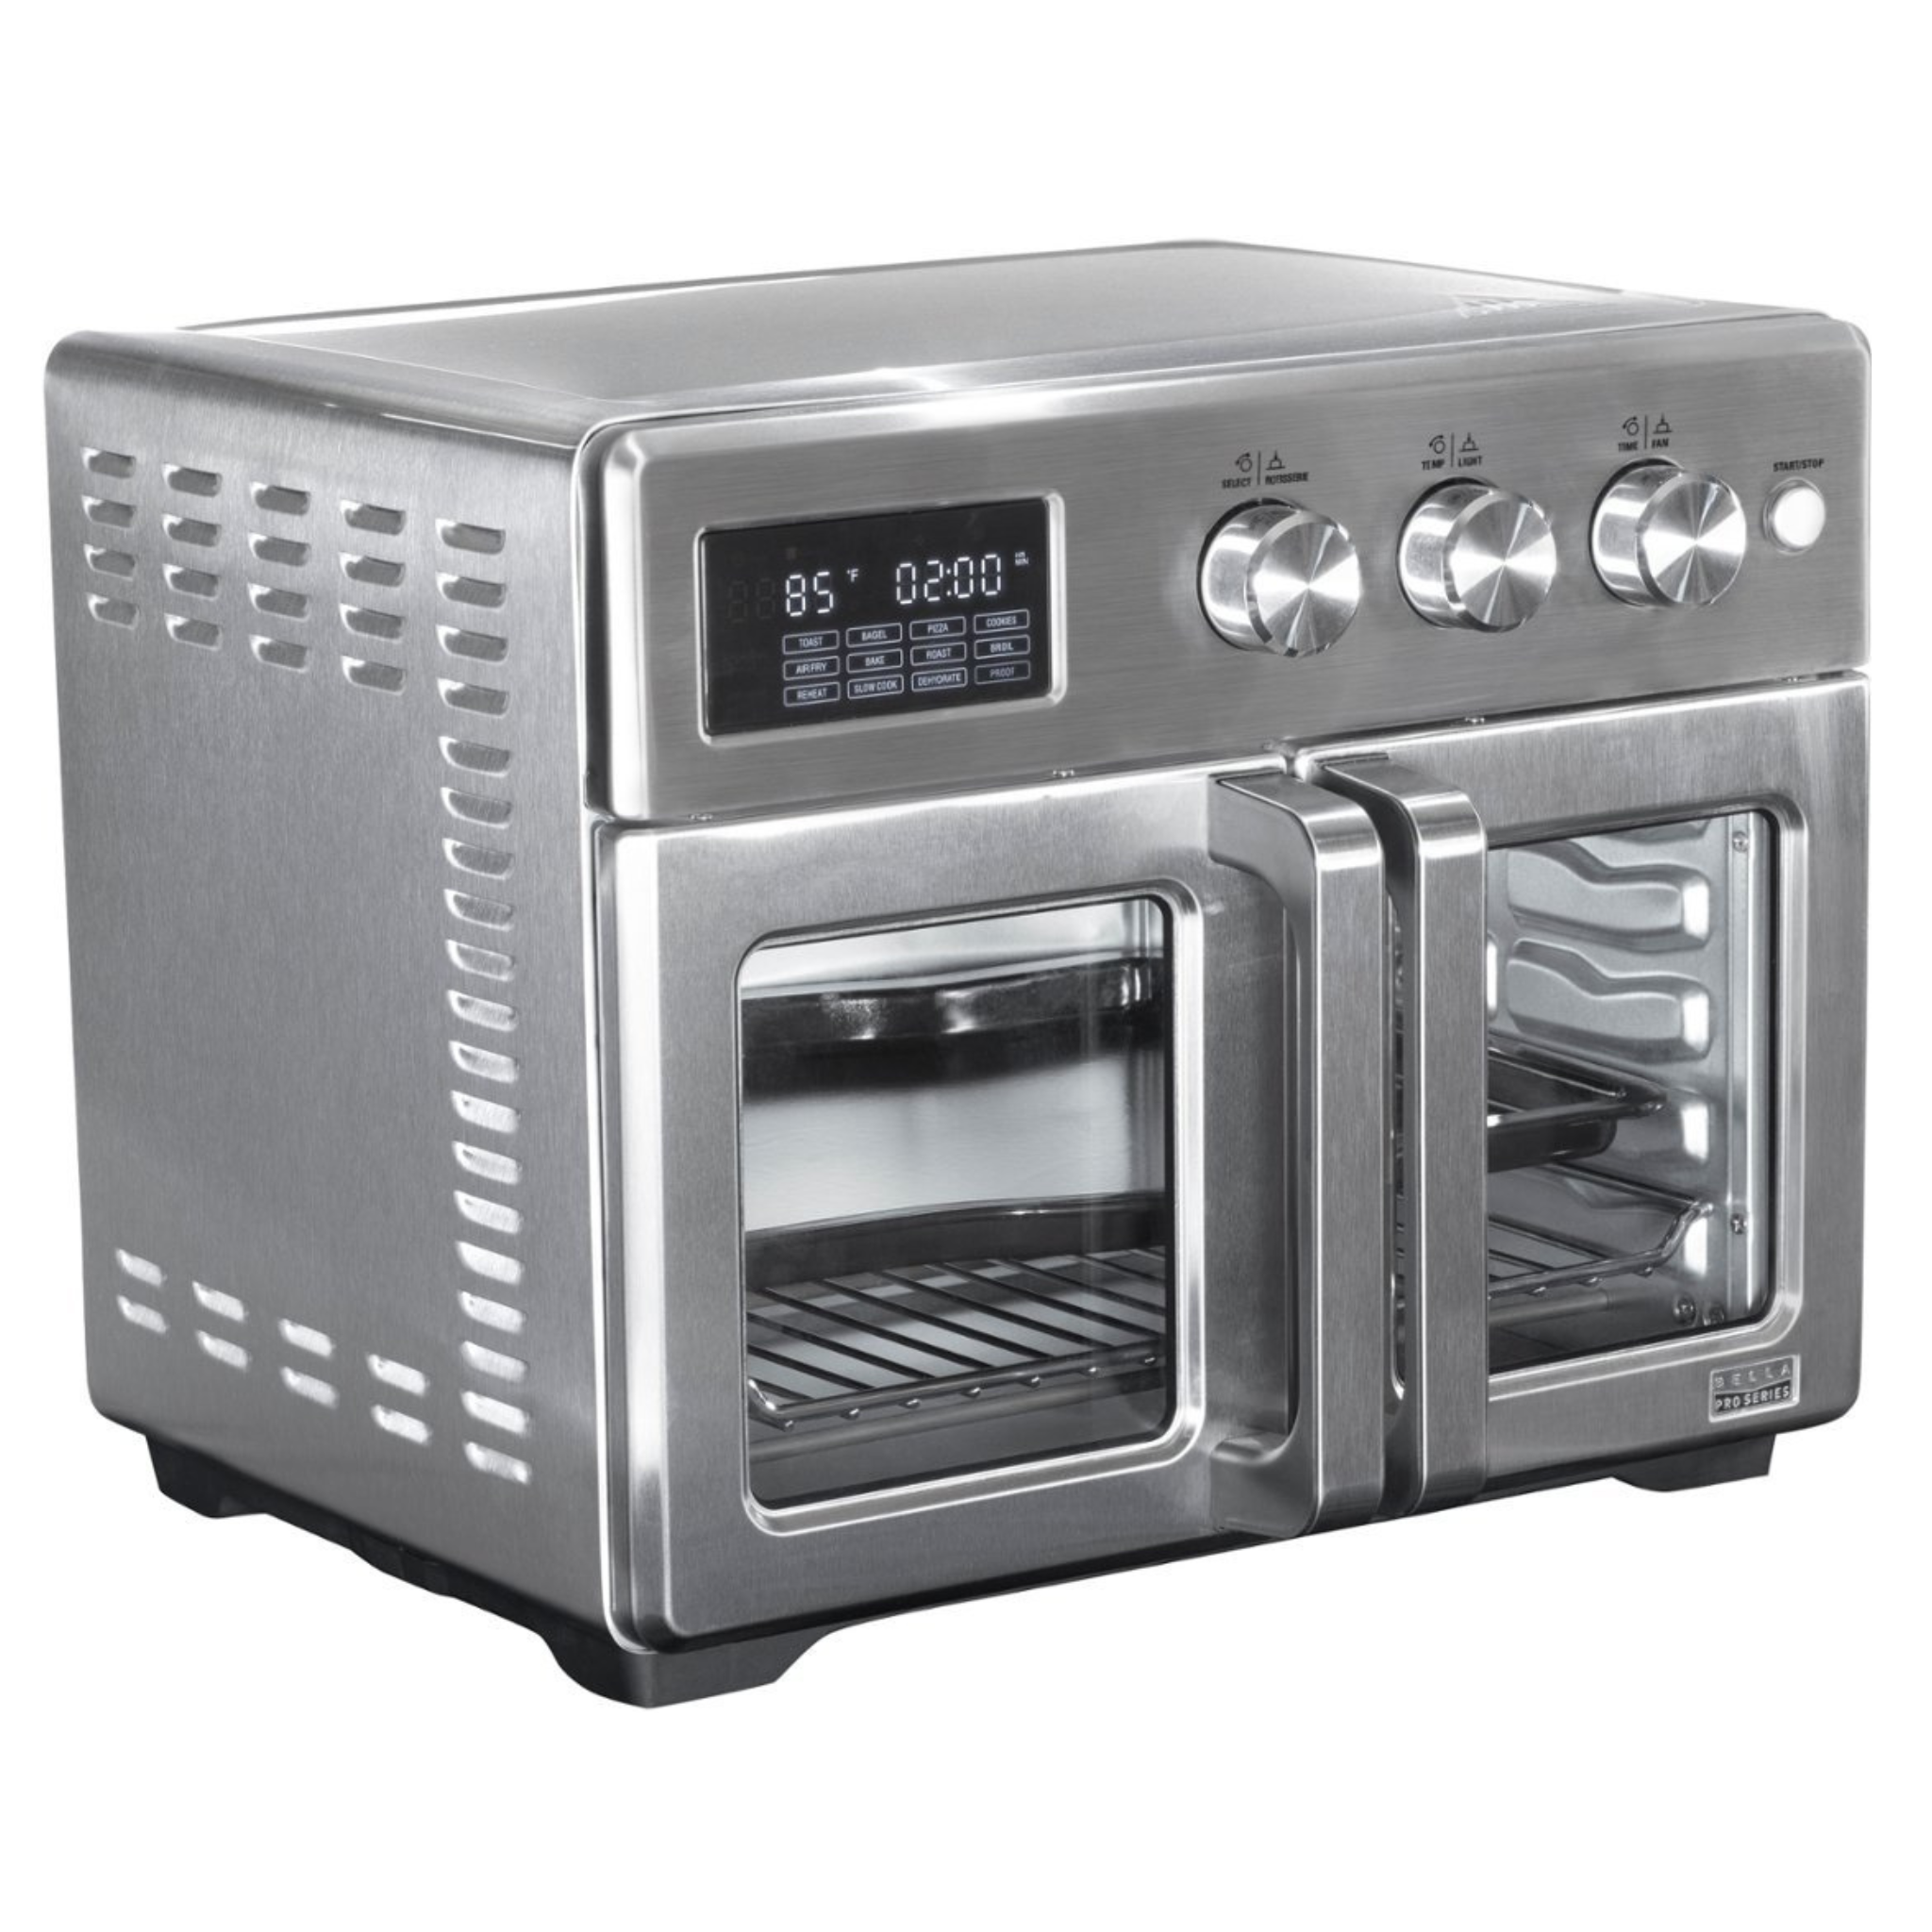 12-in-1 6-Slice Toaster Oven + 33-qt. Air Fryer with French Doors